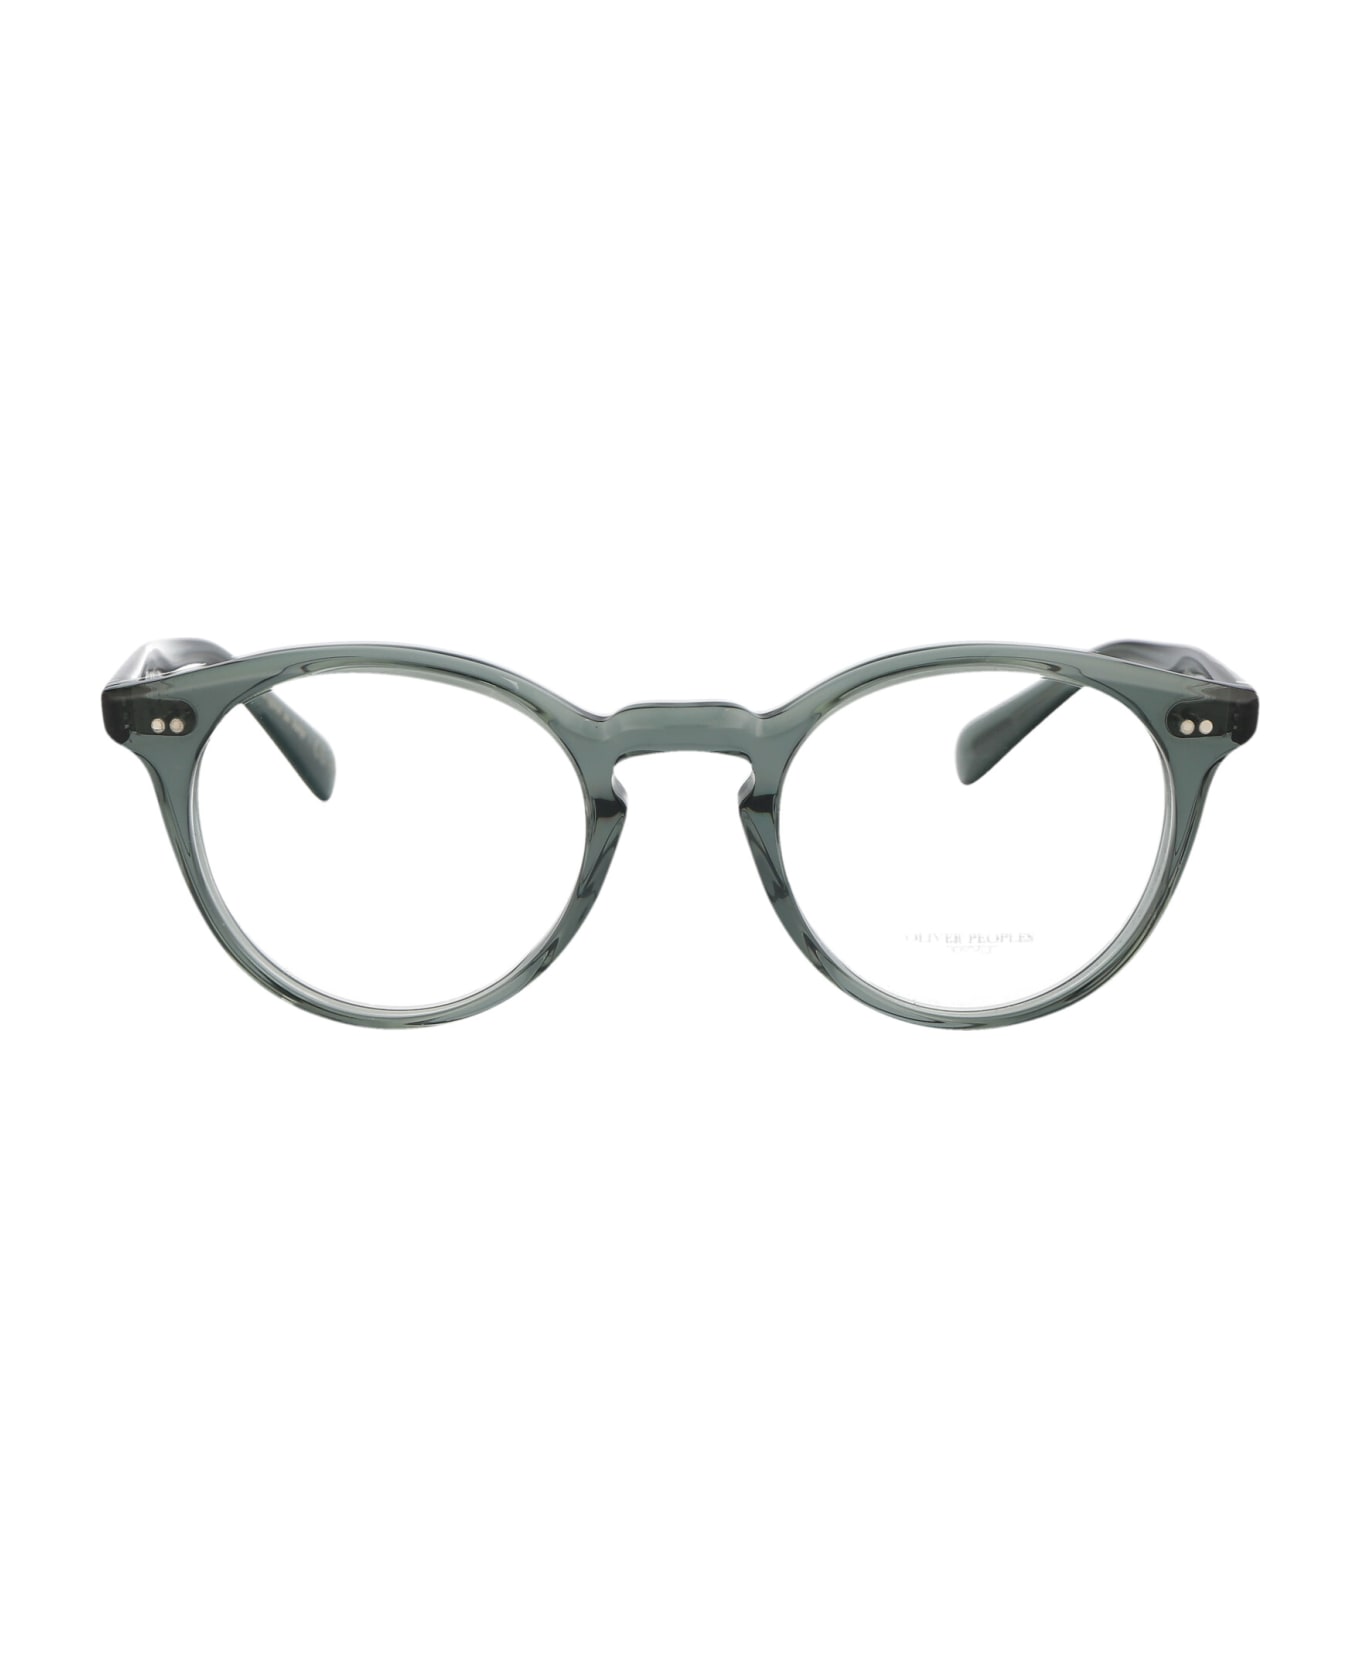 Oliver Peoples Romare Glasses - 1547 Ivy